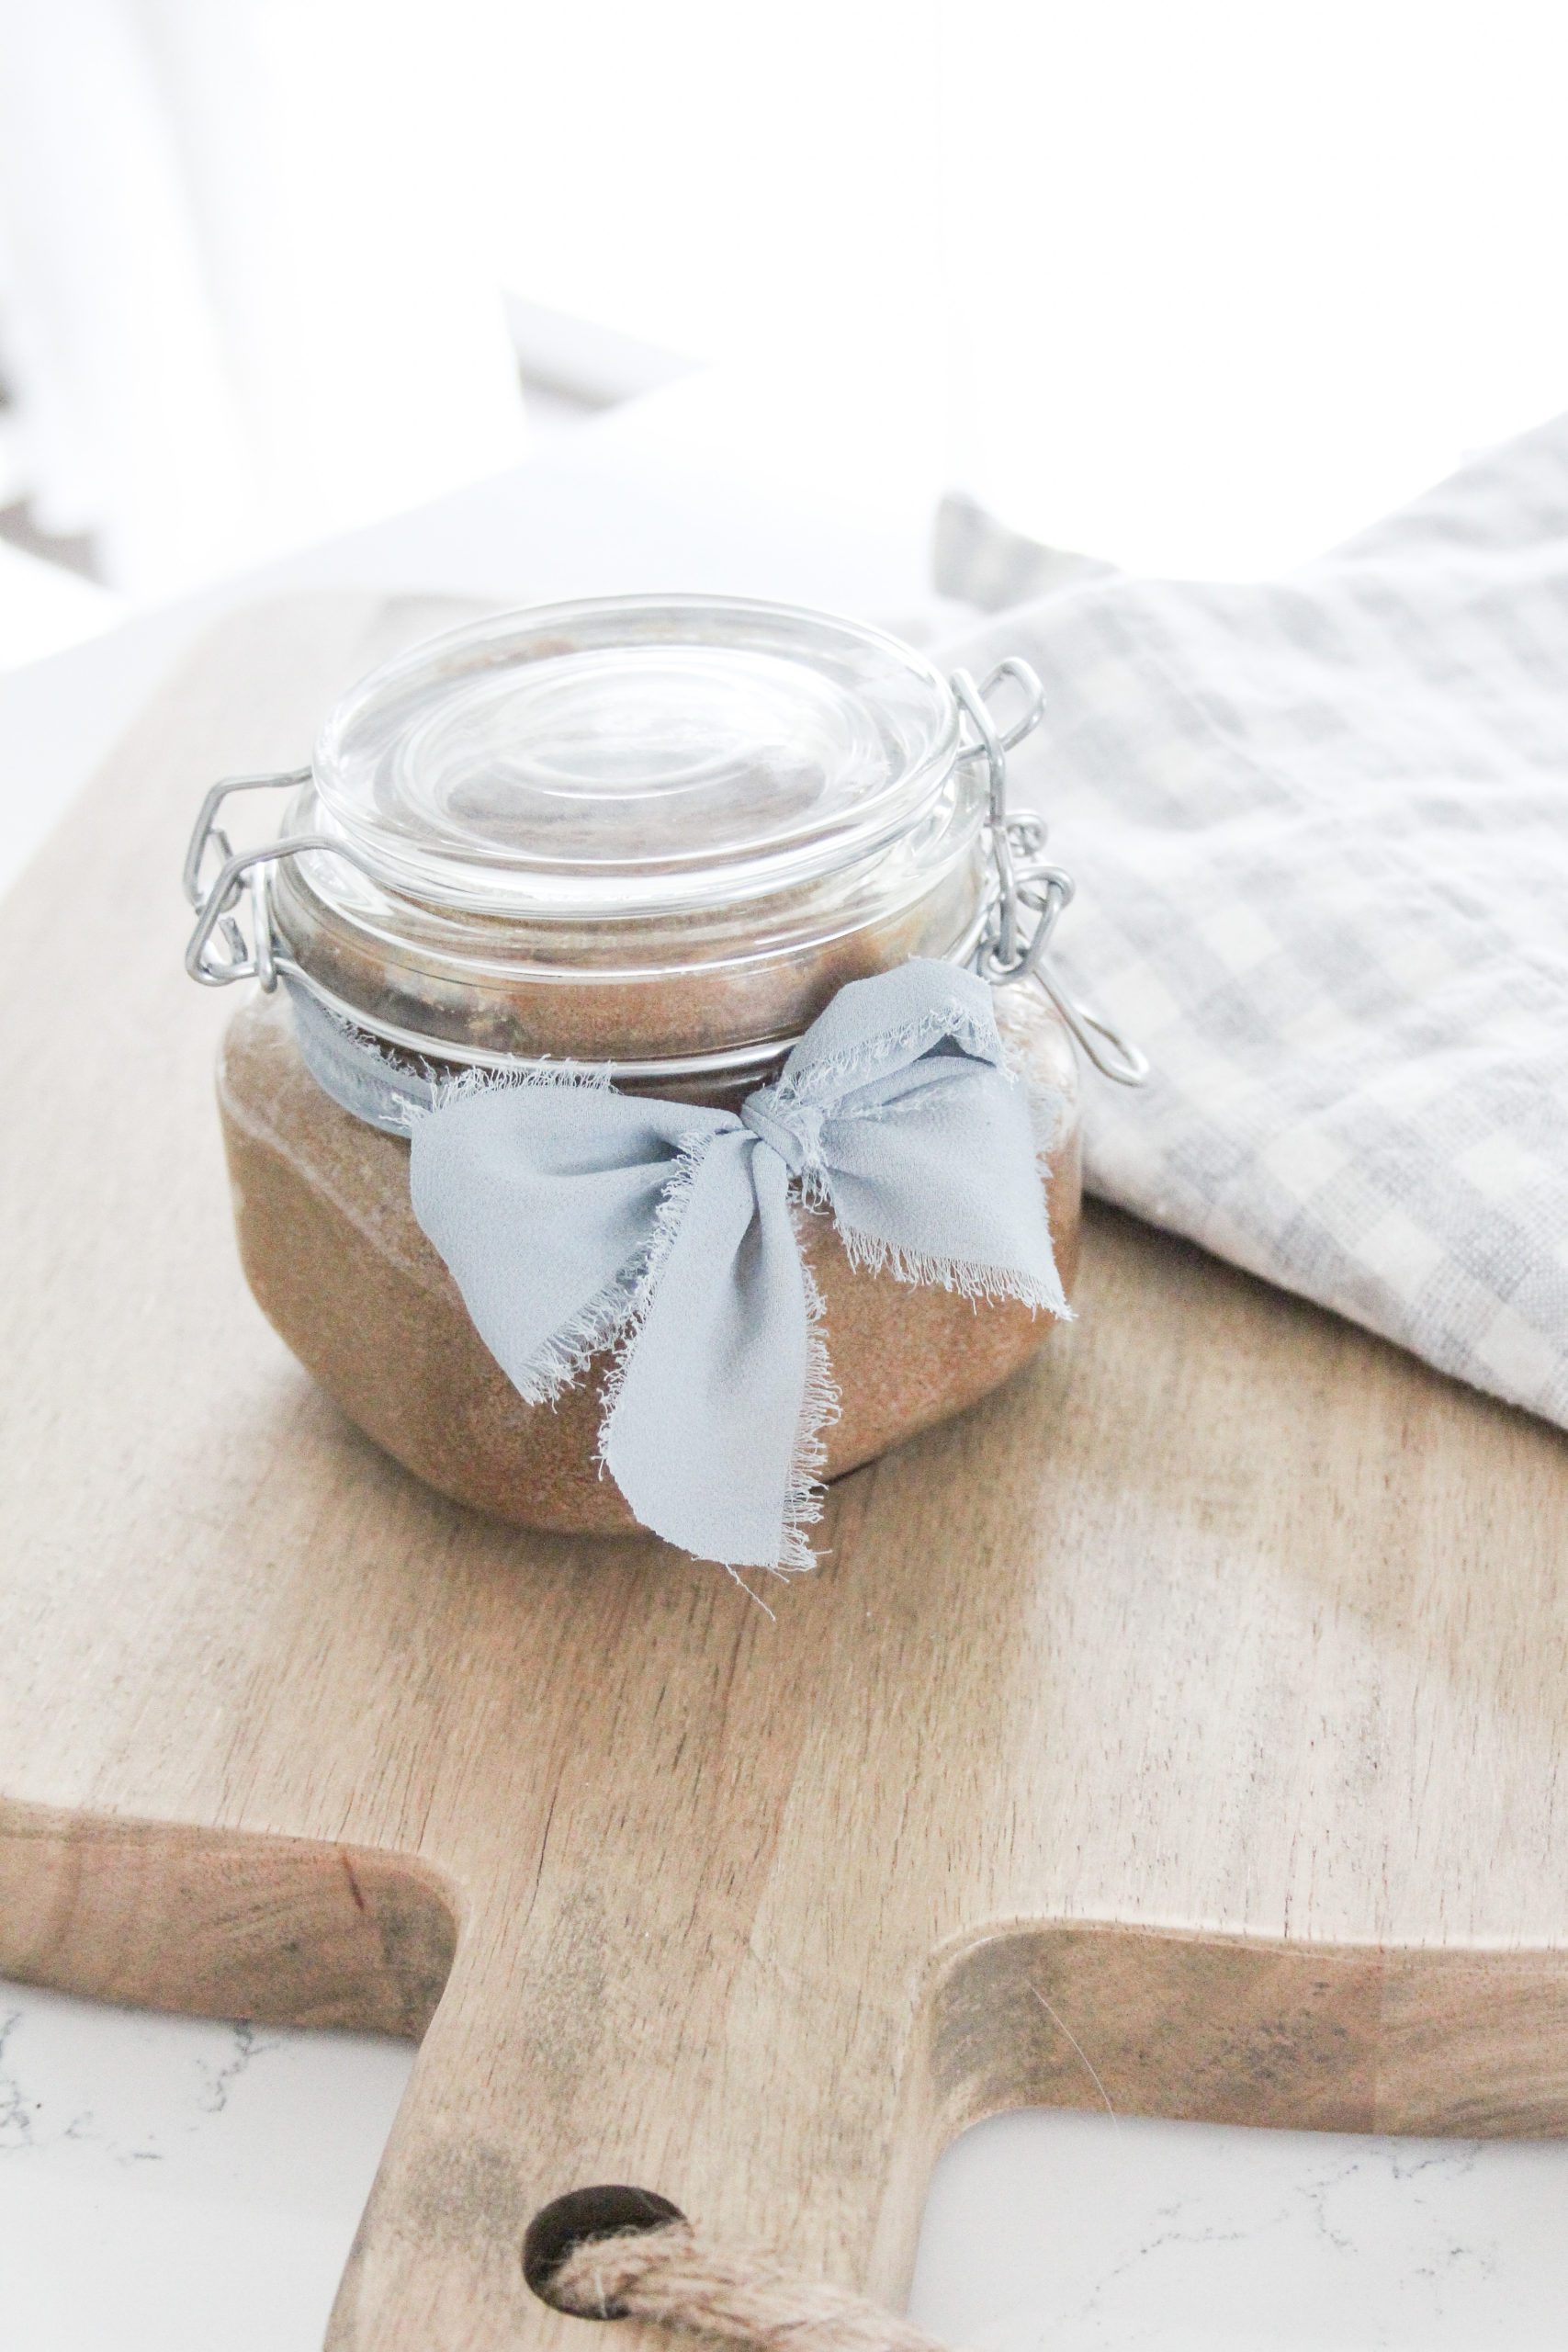 vanilla and honey brown sugar scrub in a mason jar clamp shit container on a cutting board with a white and blue checkered apron in a farmhouse kitchen